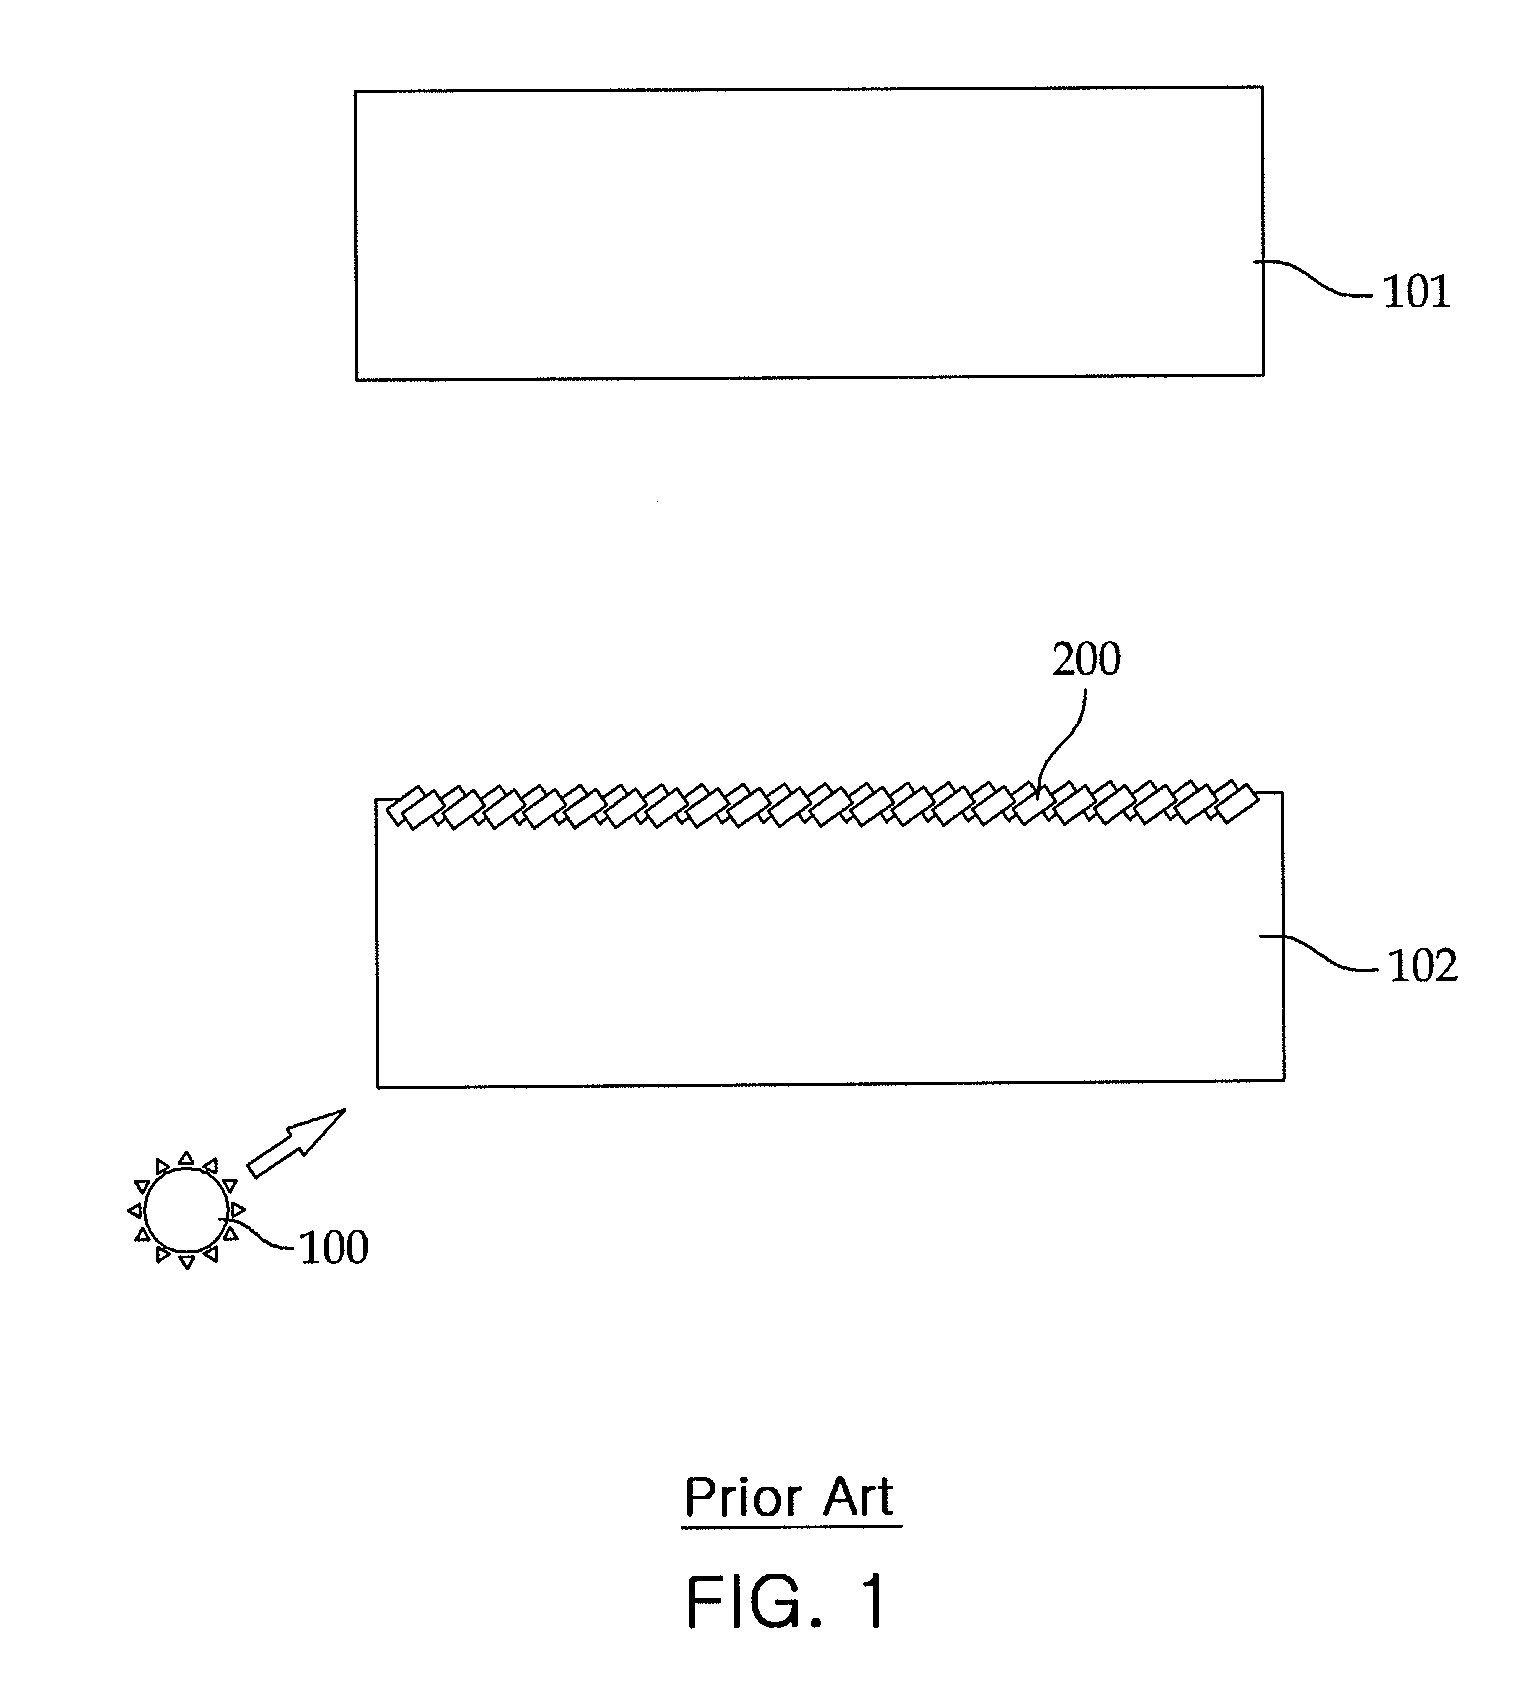 Natural Lighting System With Sequential Scanning Process